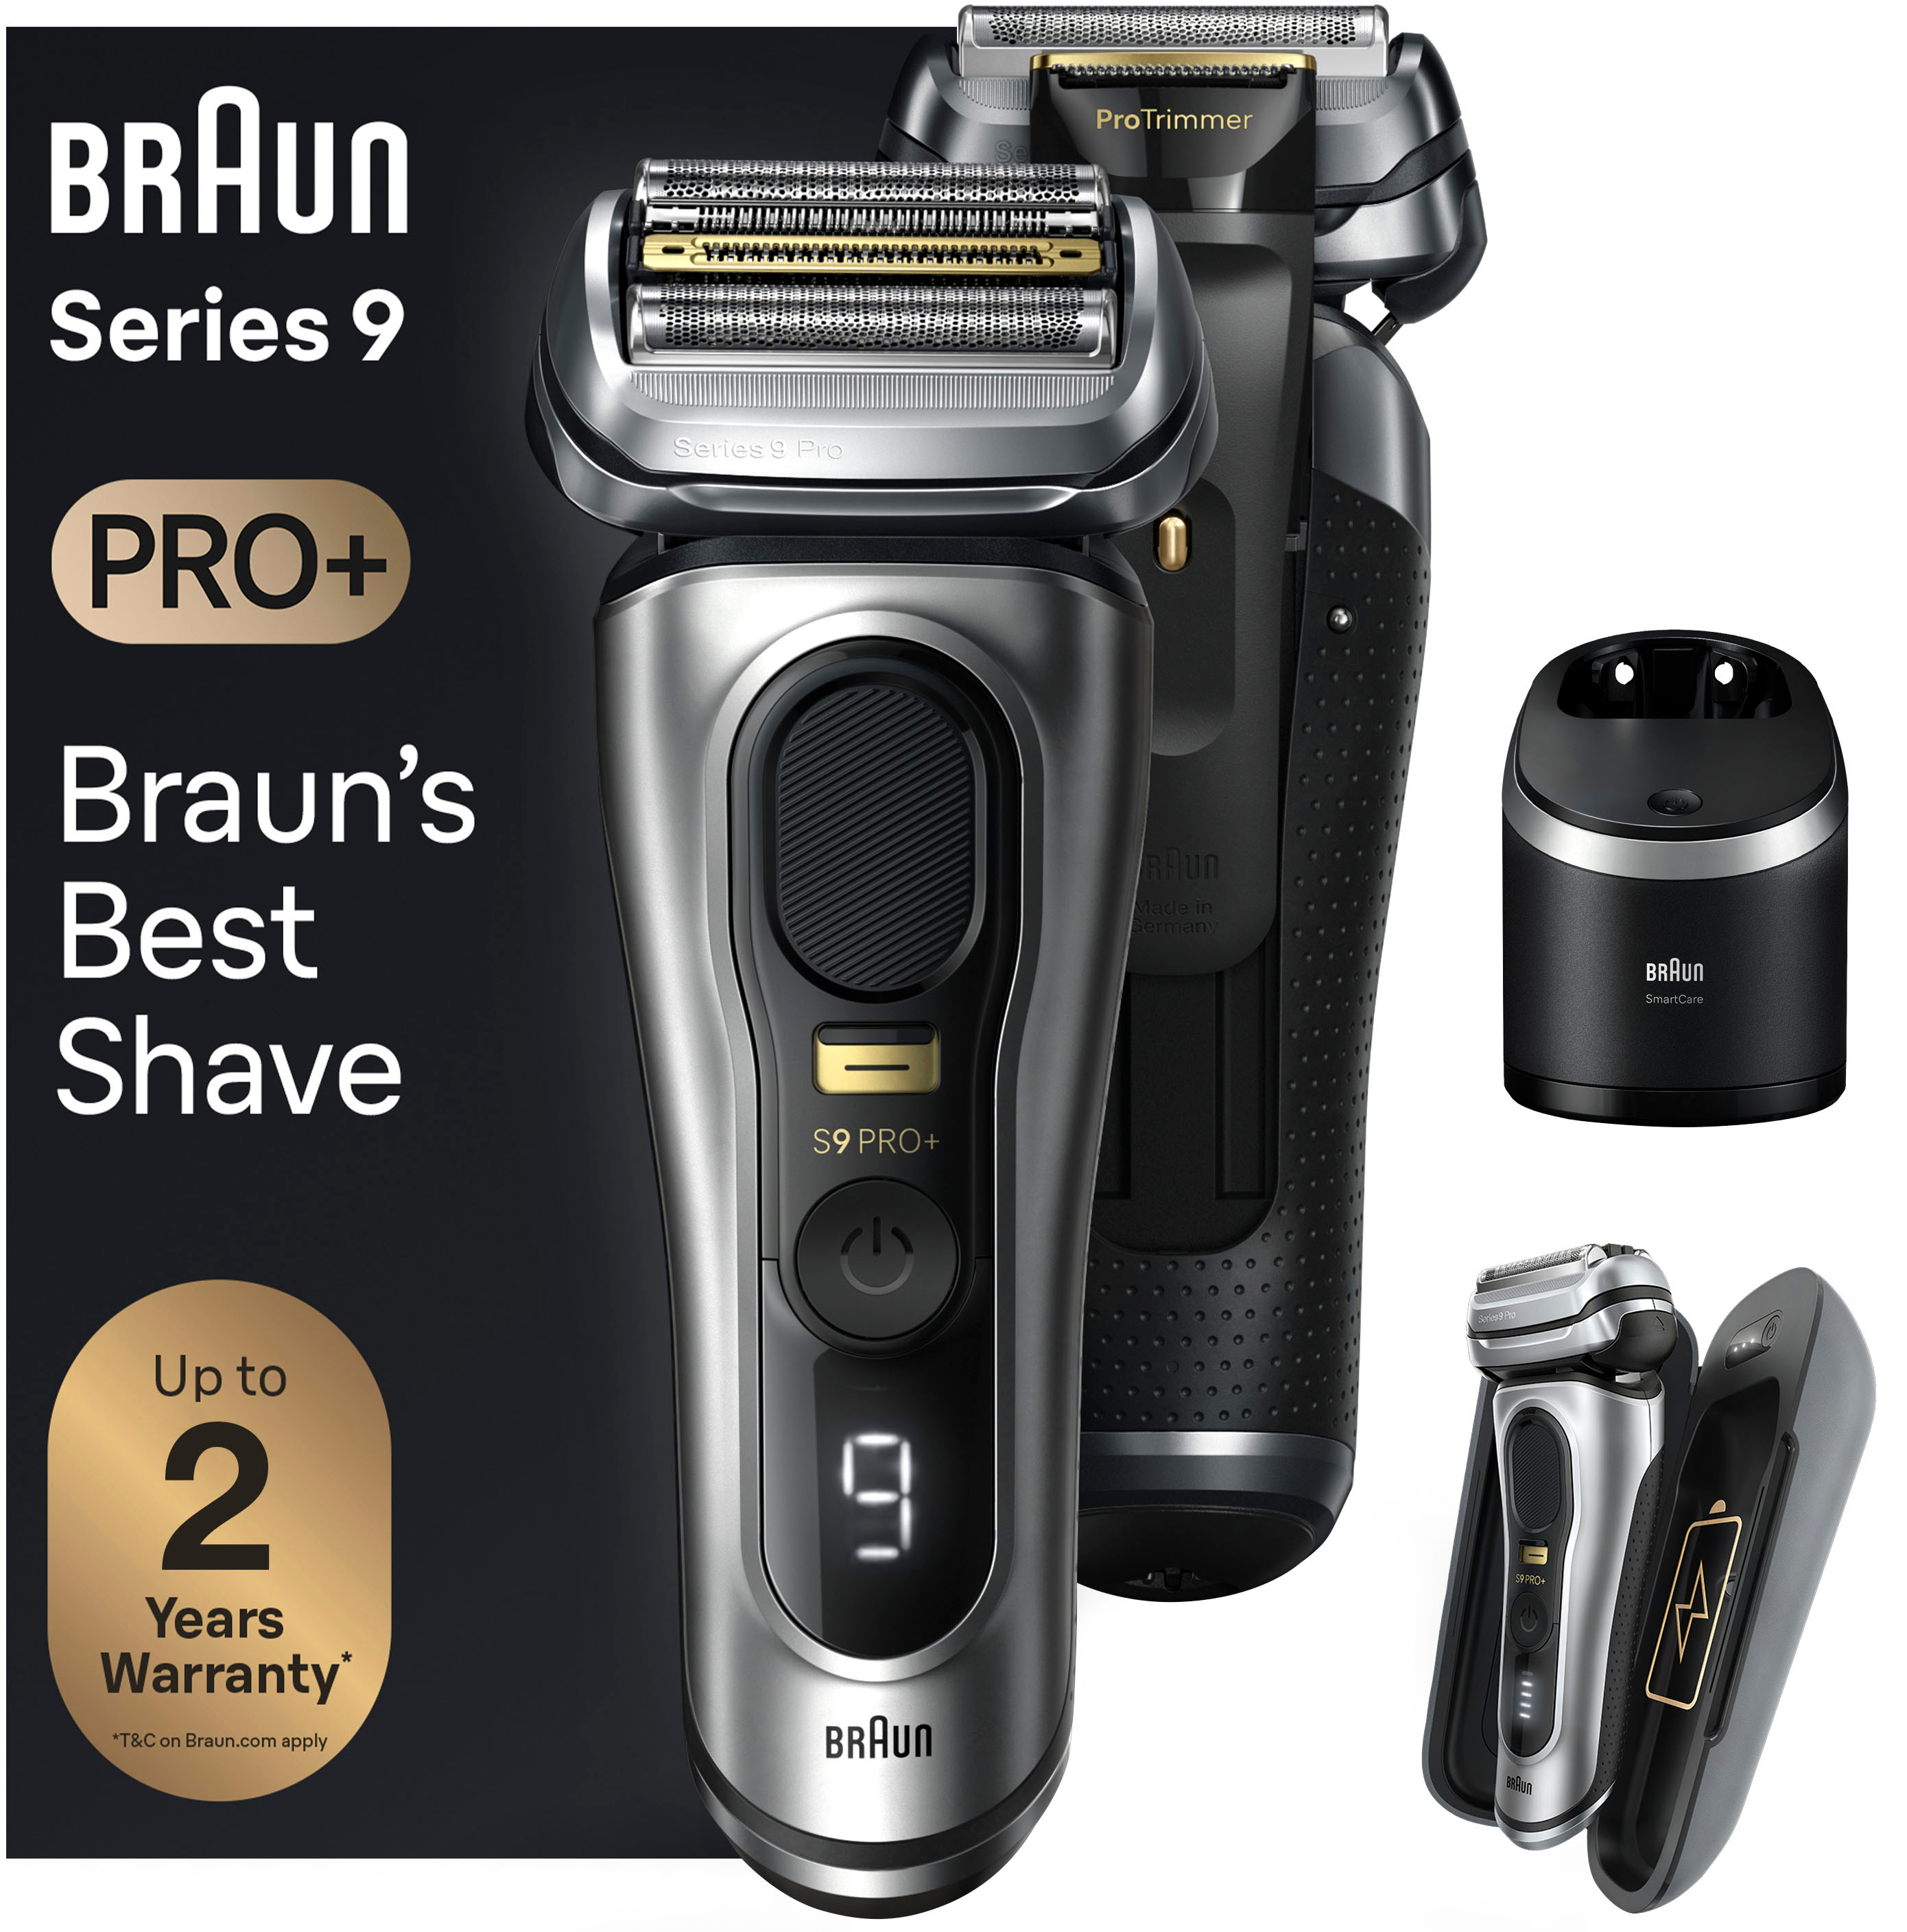 Braun Series 7 7025s Flex Rechargeable Wet Dry Men's Electric Shaver with  Beard Trimmer